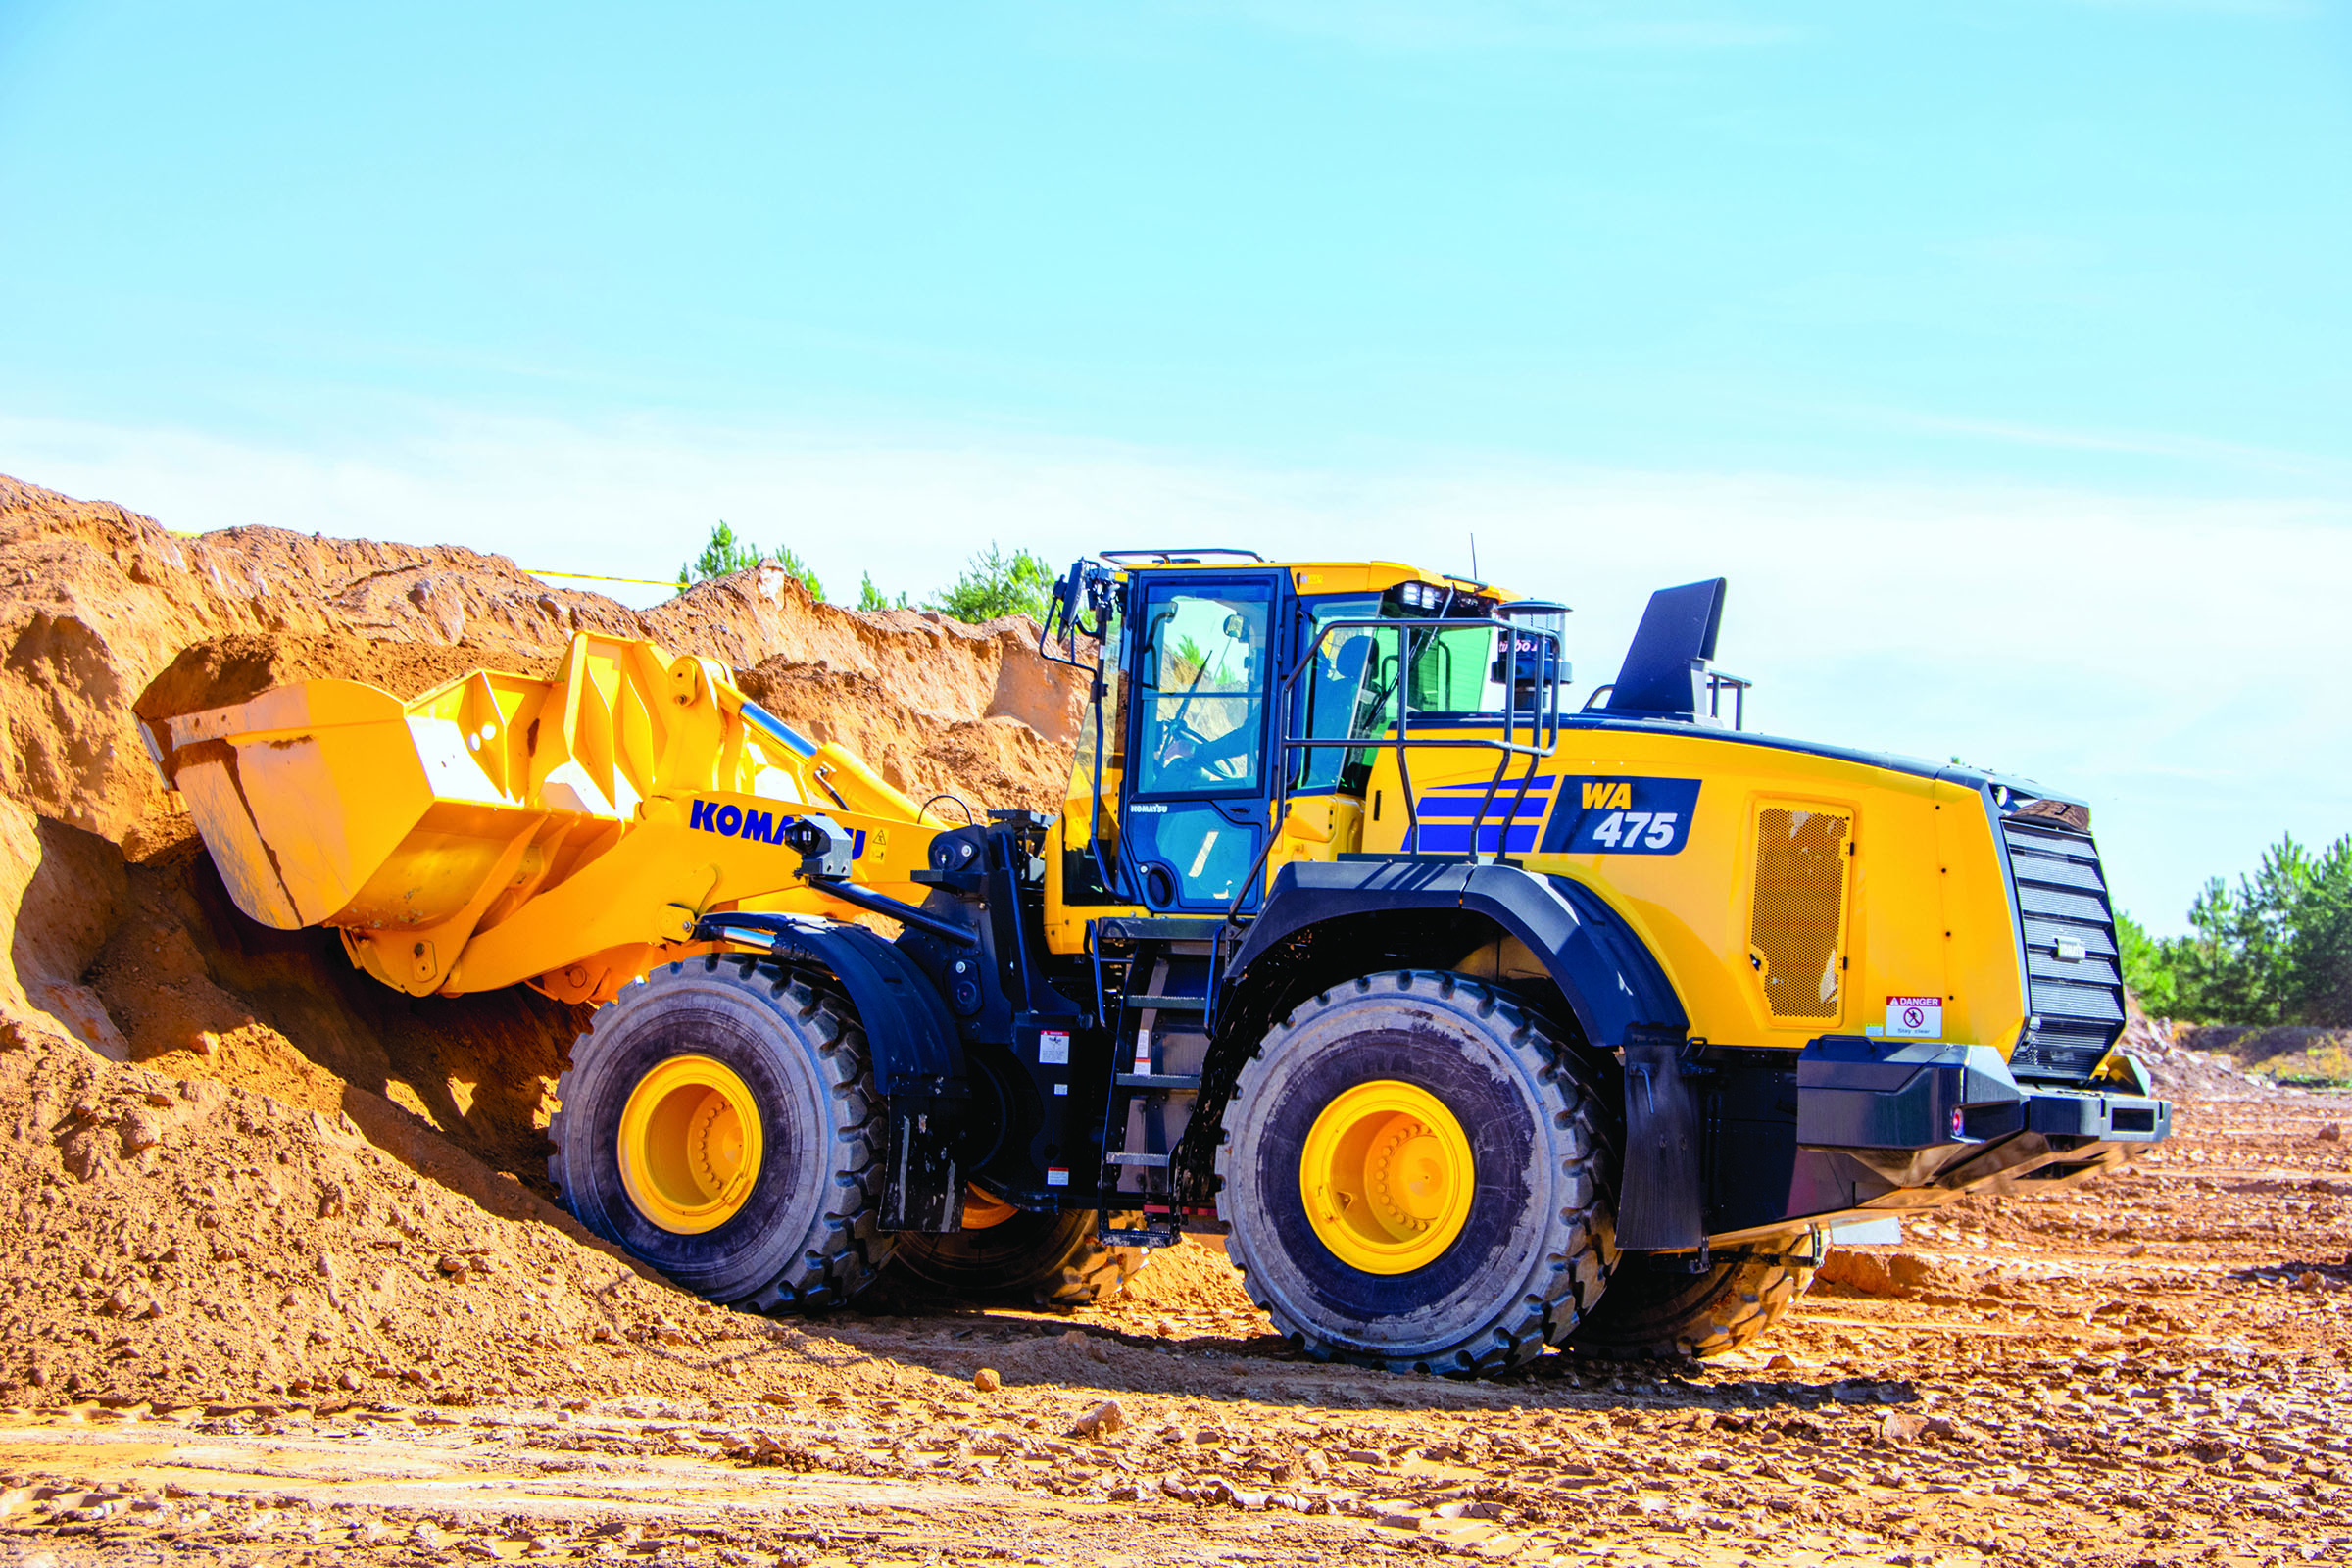 Read more about the article Komatsu WA475-10 Wheel Loader With Increased Fuel Efficiency